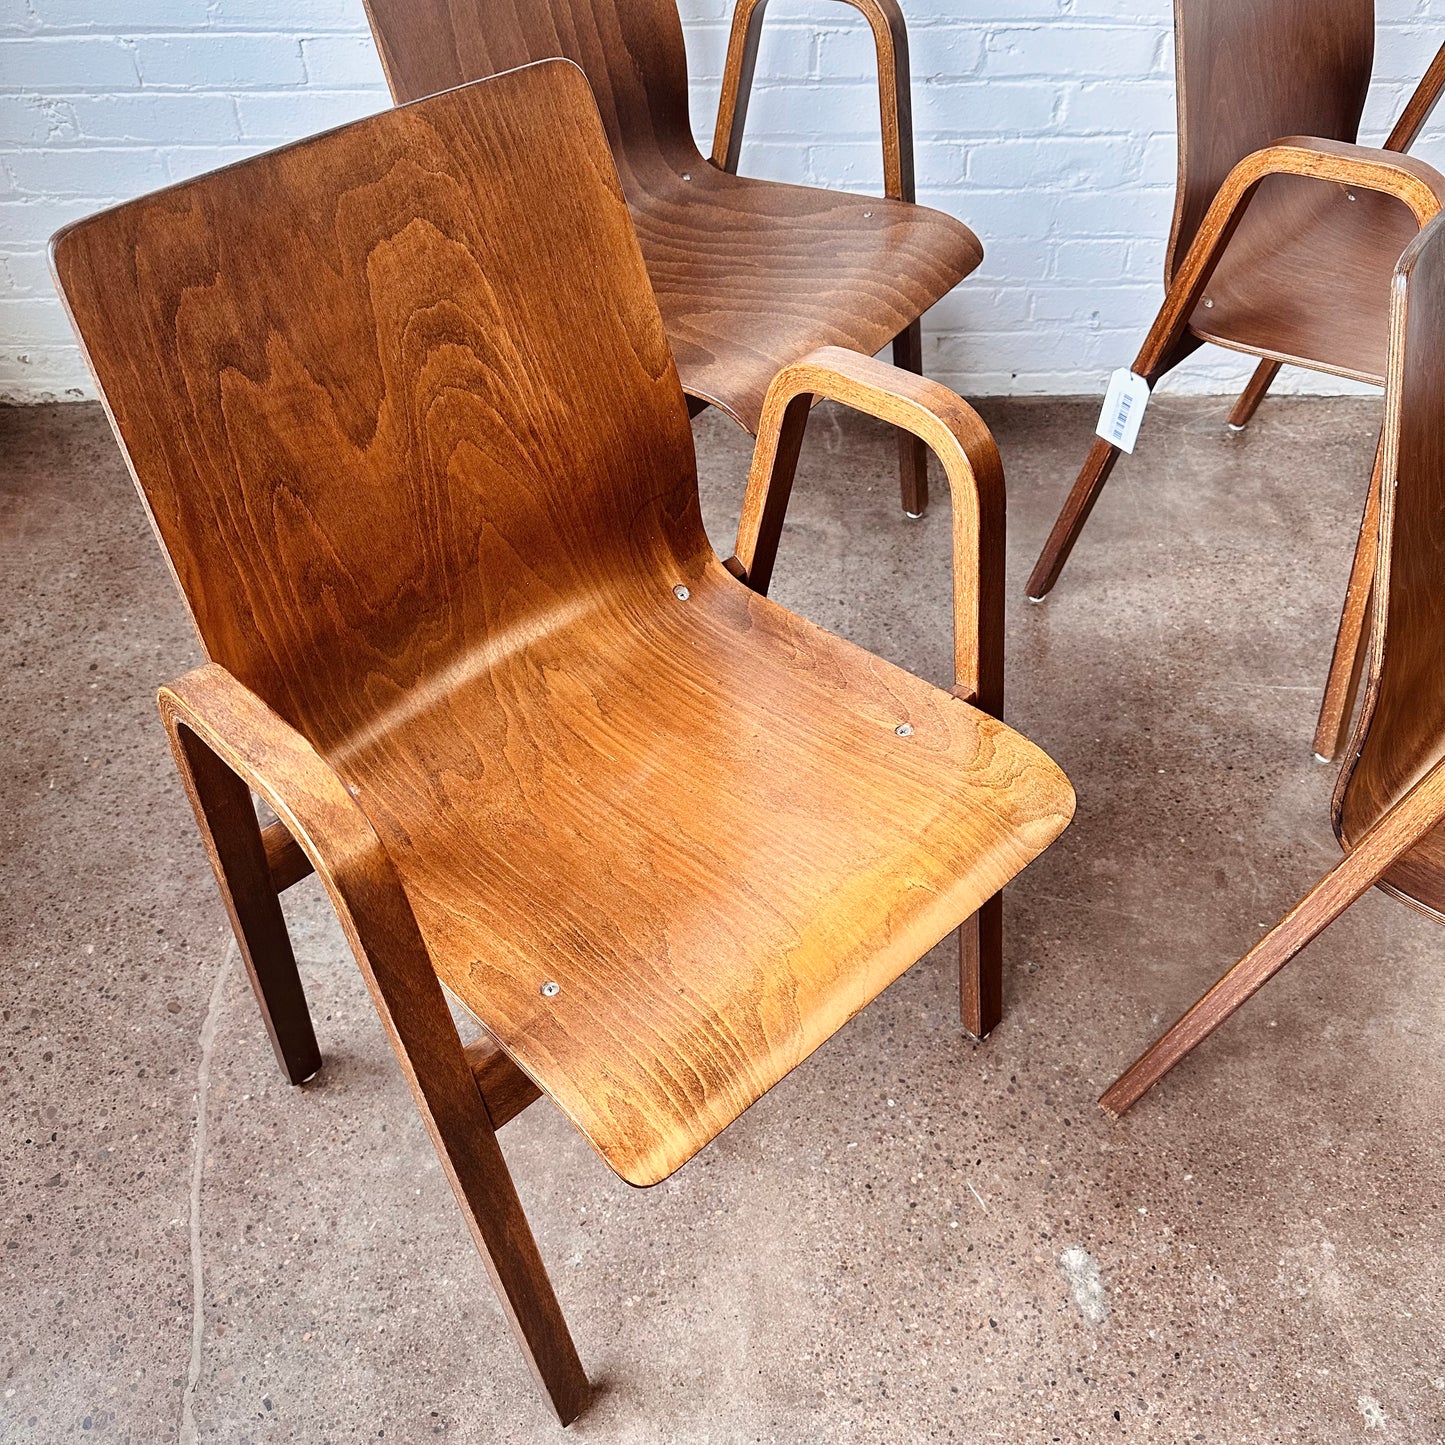 SET OF 4 BENTWOOD STACKING CHAIRS FROM HOLLAND